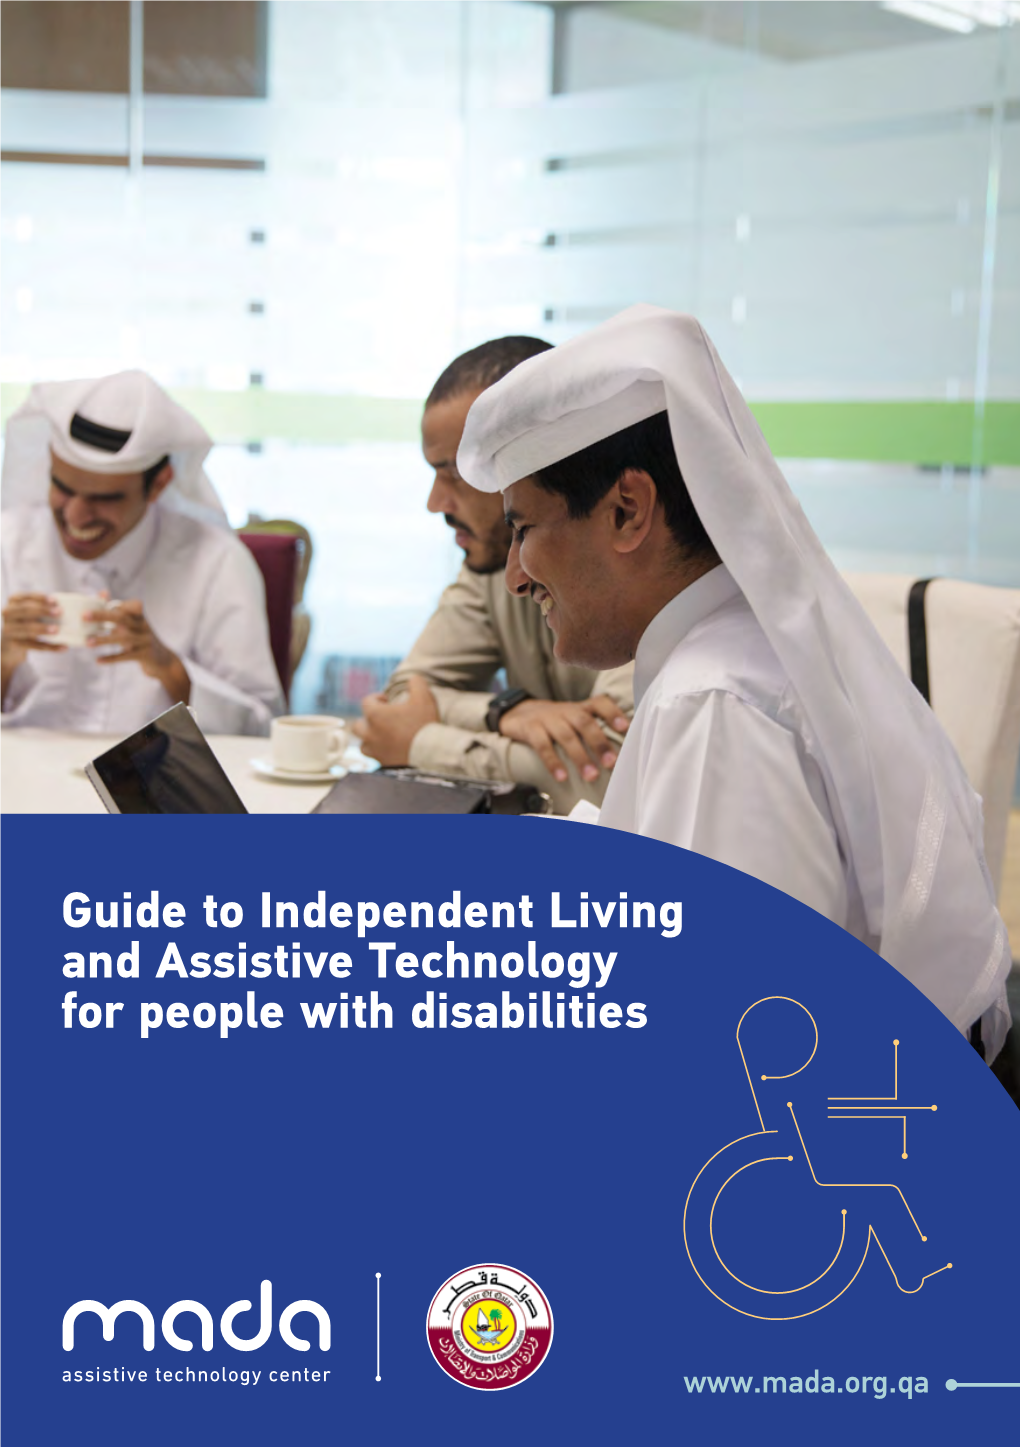 Guide to Independent Living and Assistive Technology for People with Disabilities